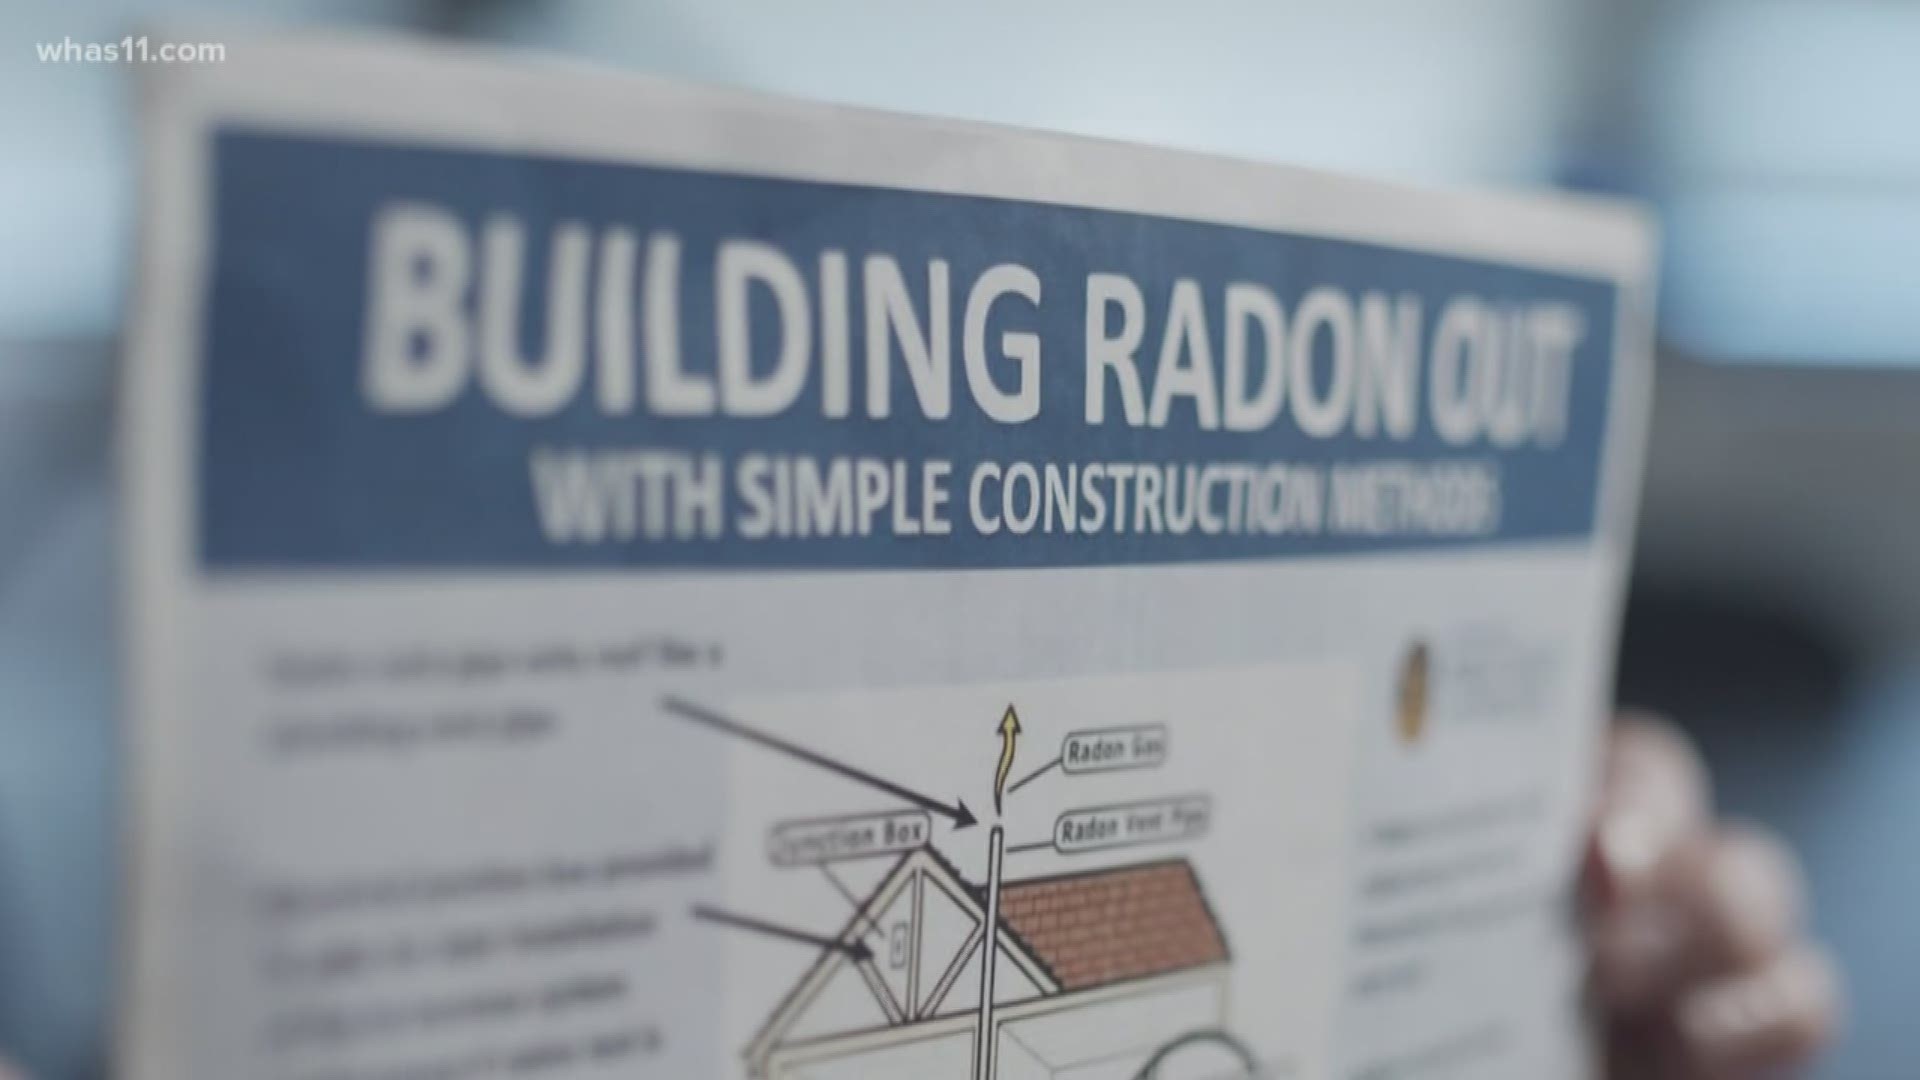 Both states have passed laws strengthening radon regulations, however schools are still not required to test.